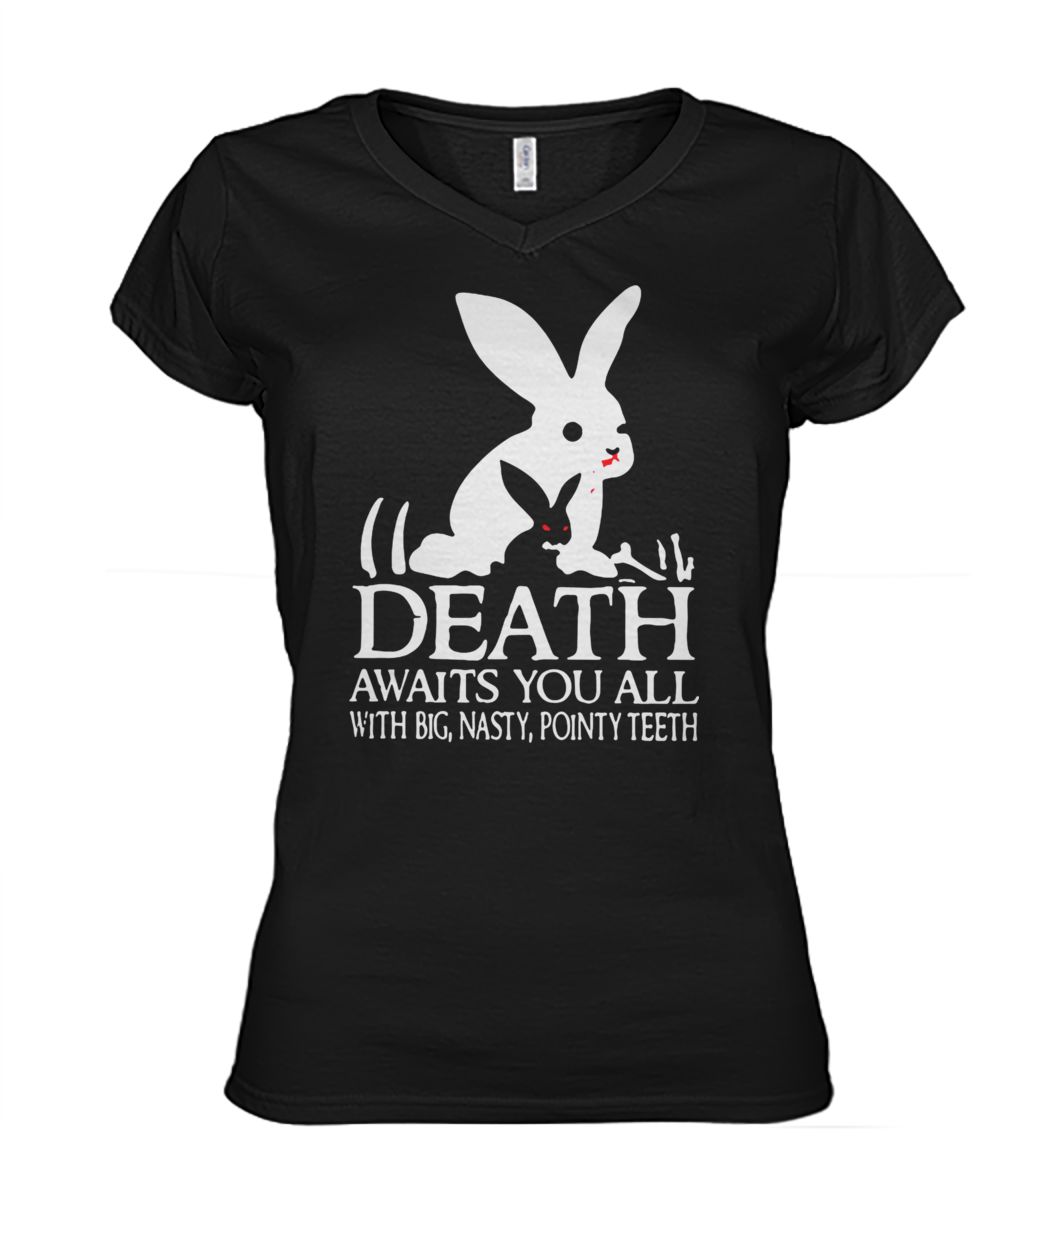 Rabbit death awaits you all with big nasty pointy teeth women's v-neck